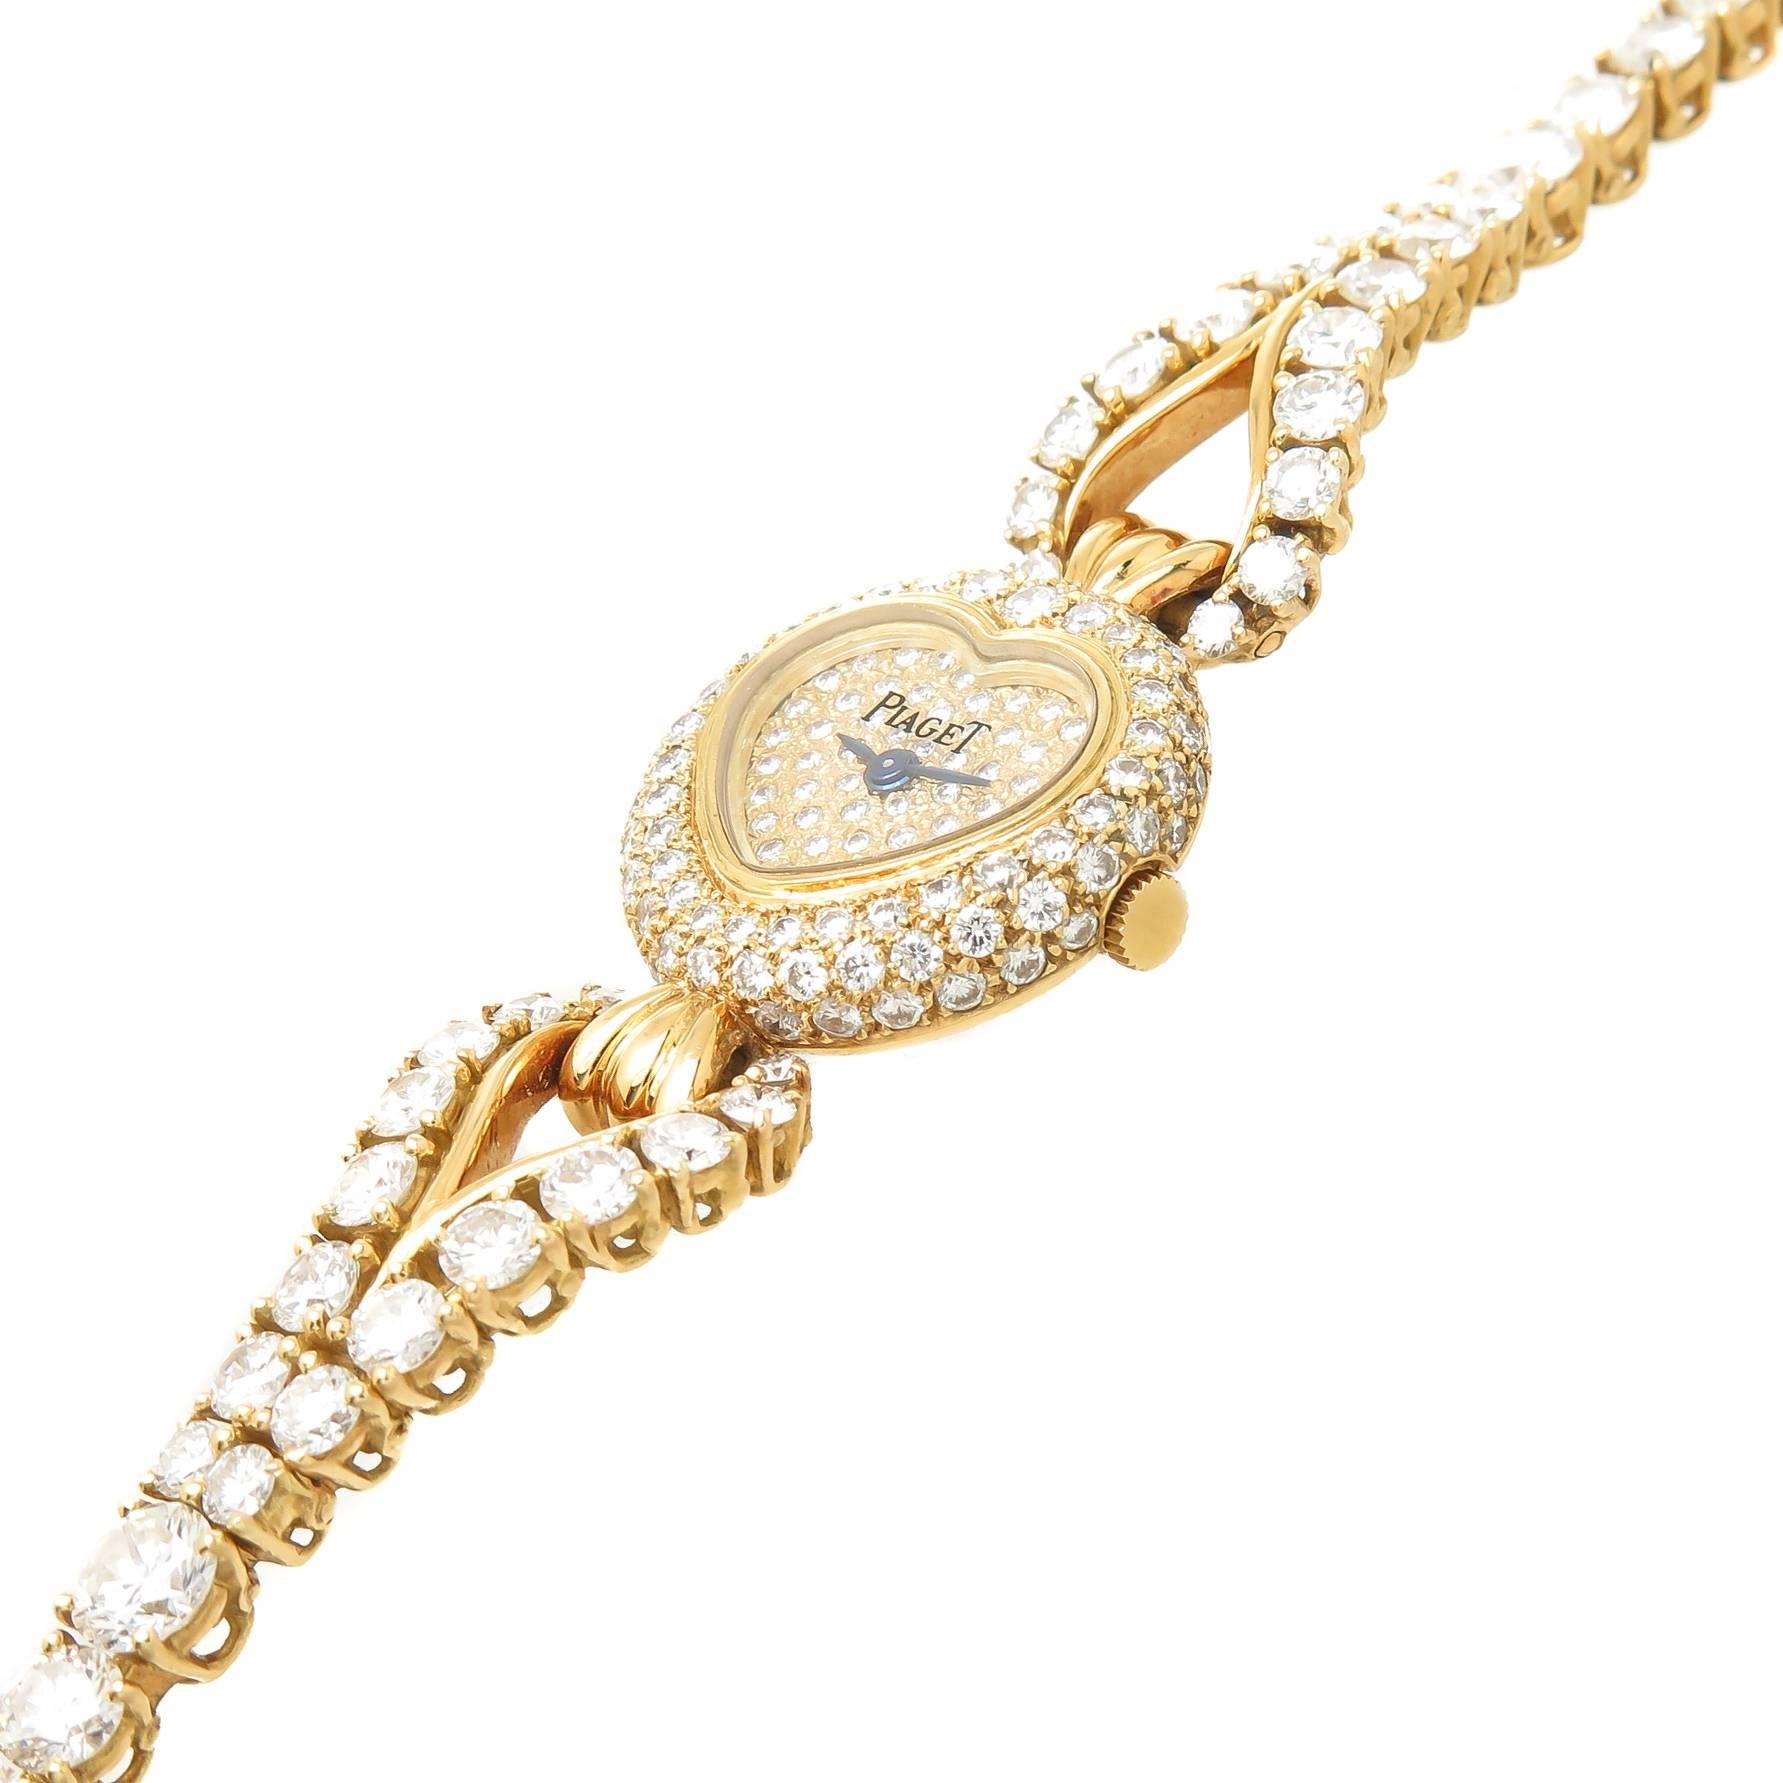 Circa 2005 Piaget Classique Collection Ladies 18K Yellow Gold and Diamond Heart Shape Bracelet Wrist watch. 20 MM watch case Pave set with Diamonds, Quartz Movement, Diamond Pave Heart Shape watch Face. Diamond set Bracelet  with larger Round